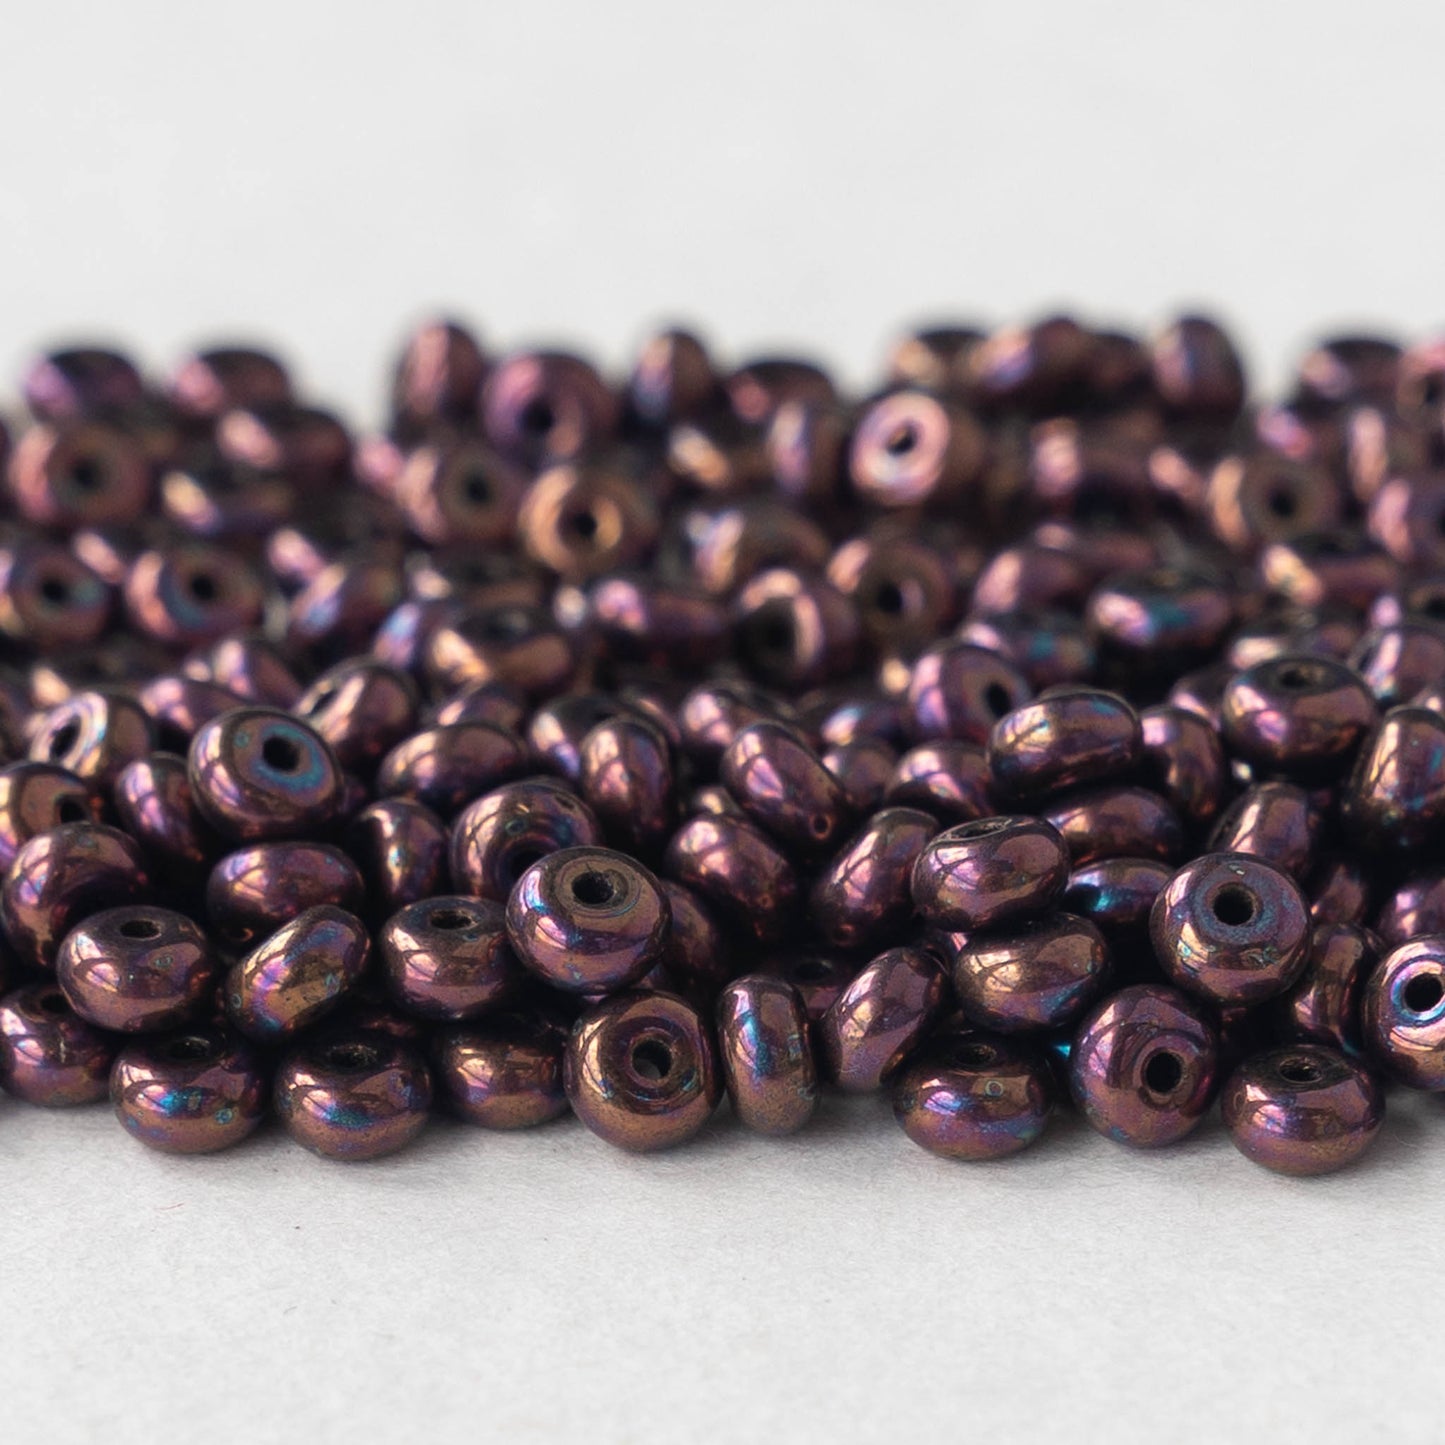 Load image into Gallery viewer, 4mm Rondelle Beads - Metallic Burgundy - 10 Grams
